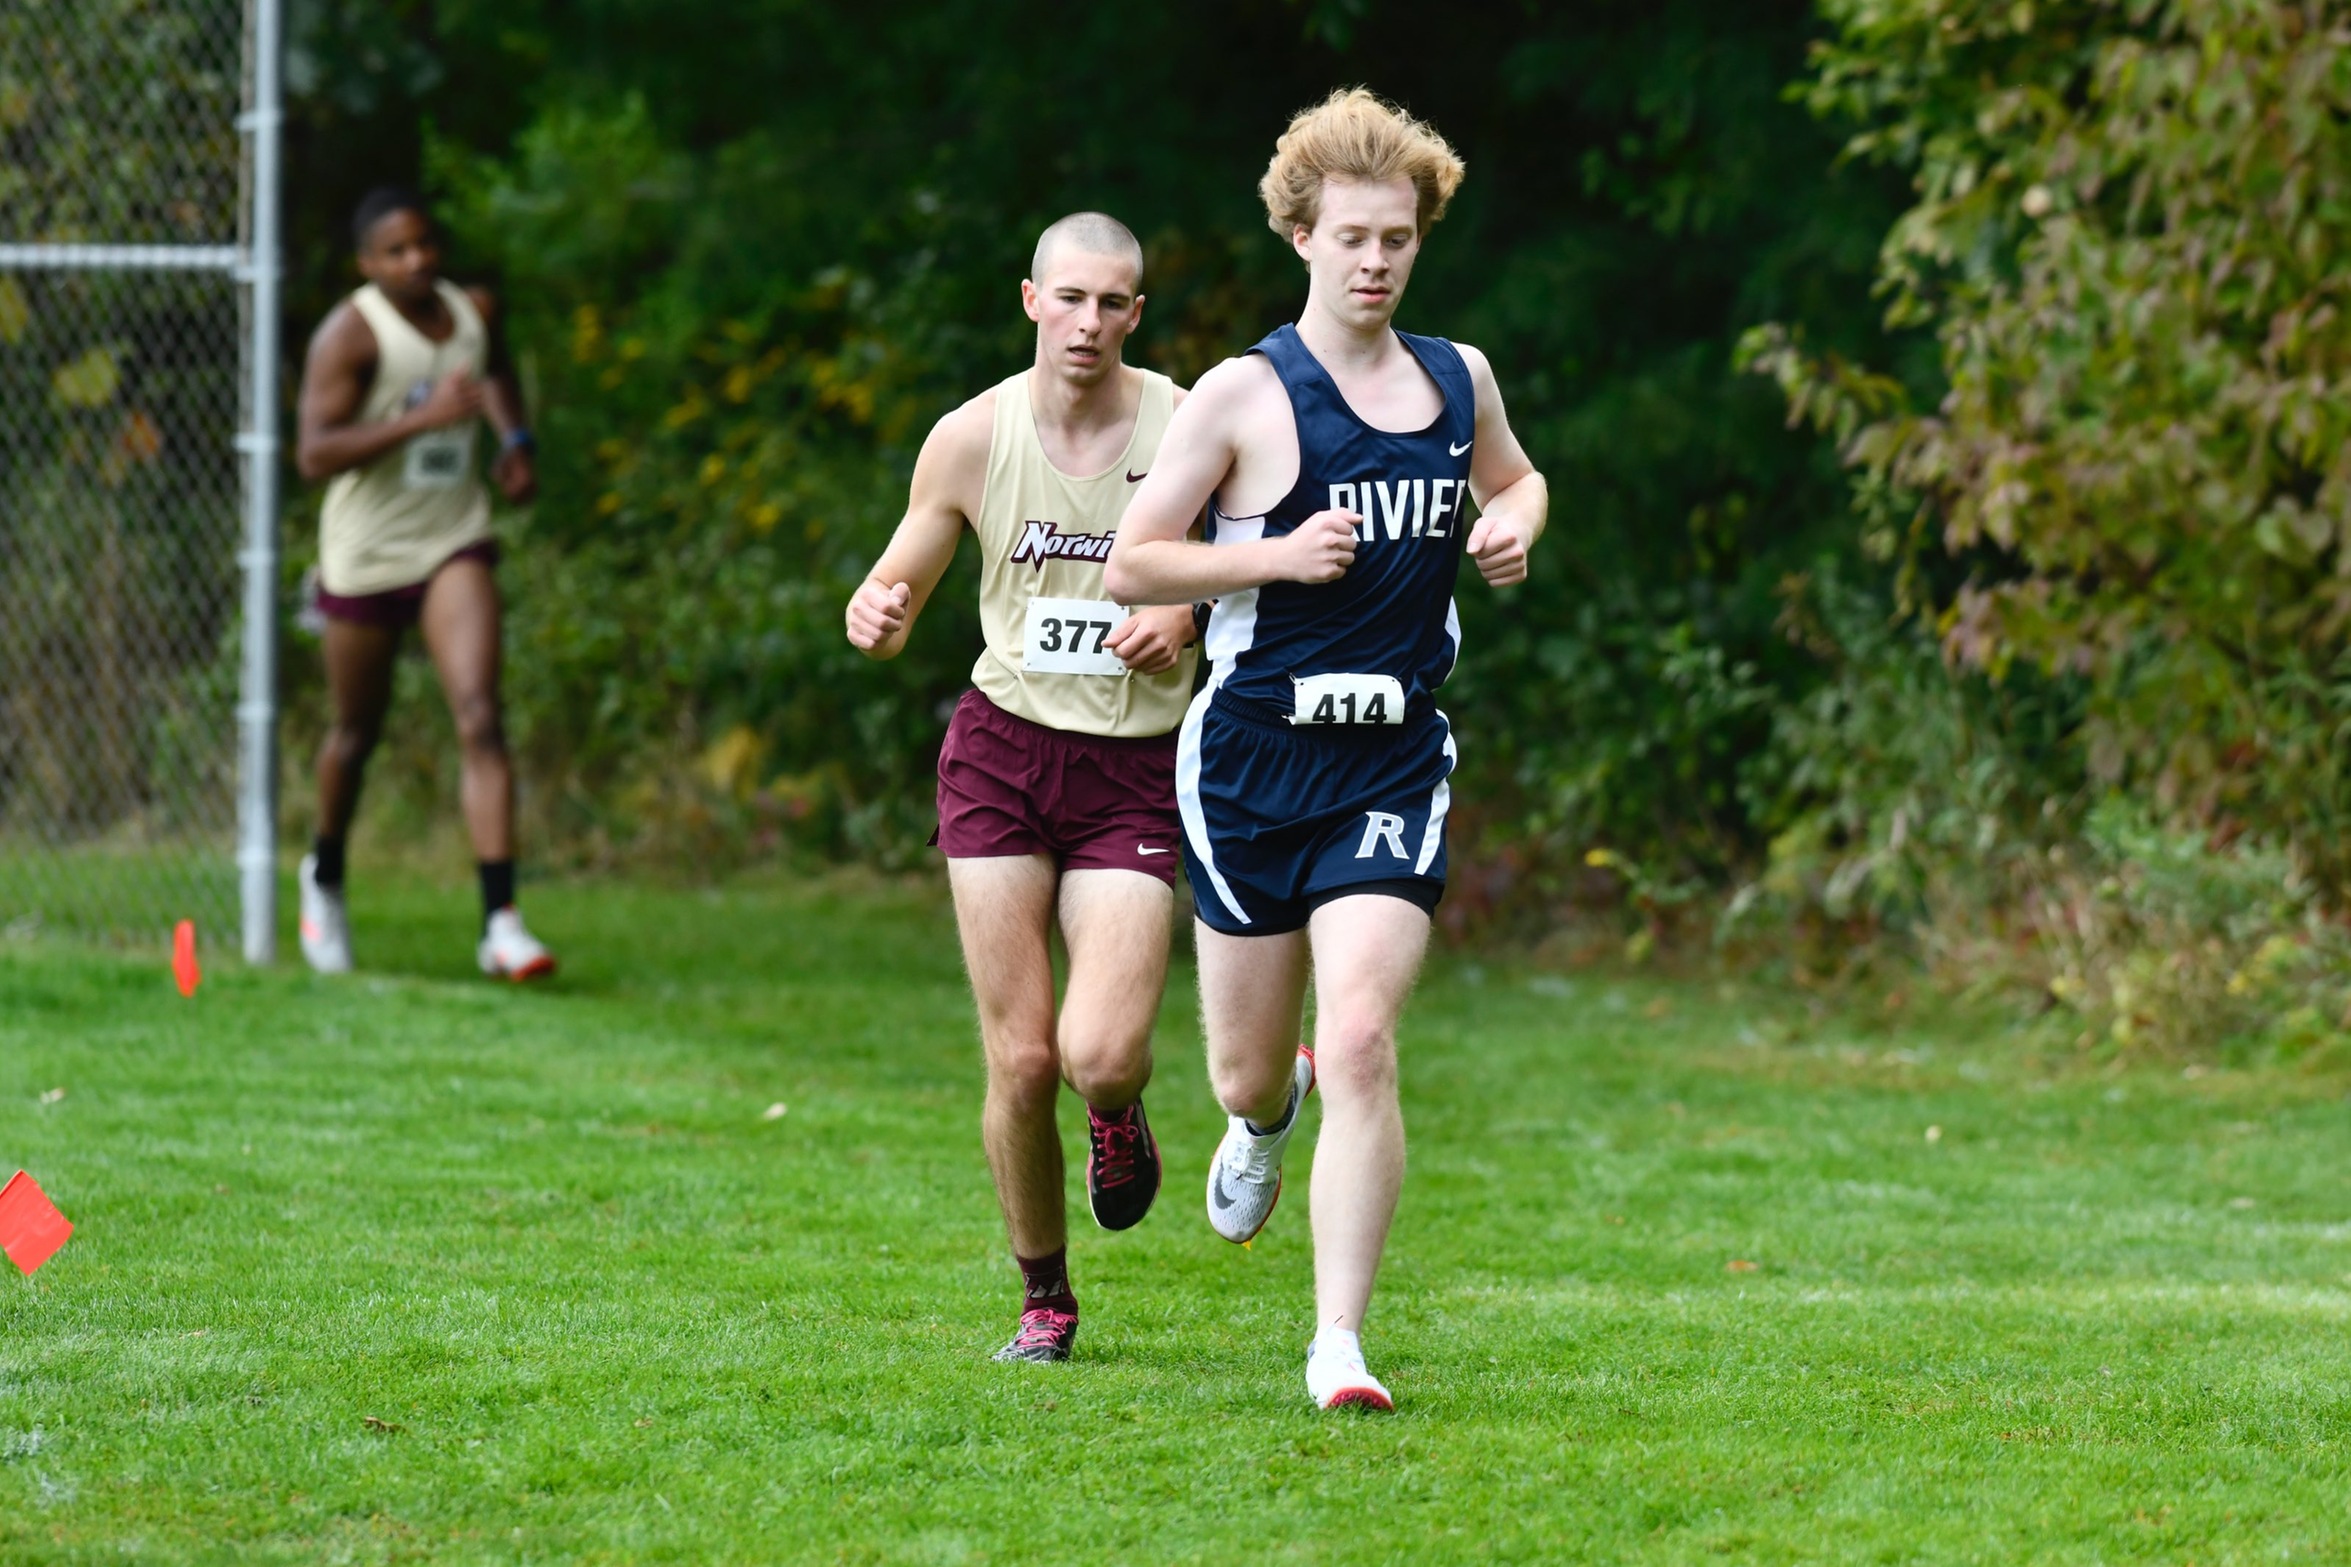 Men's Cross Country Result at Keene State